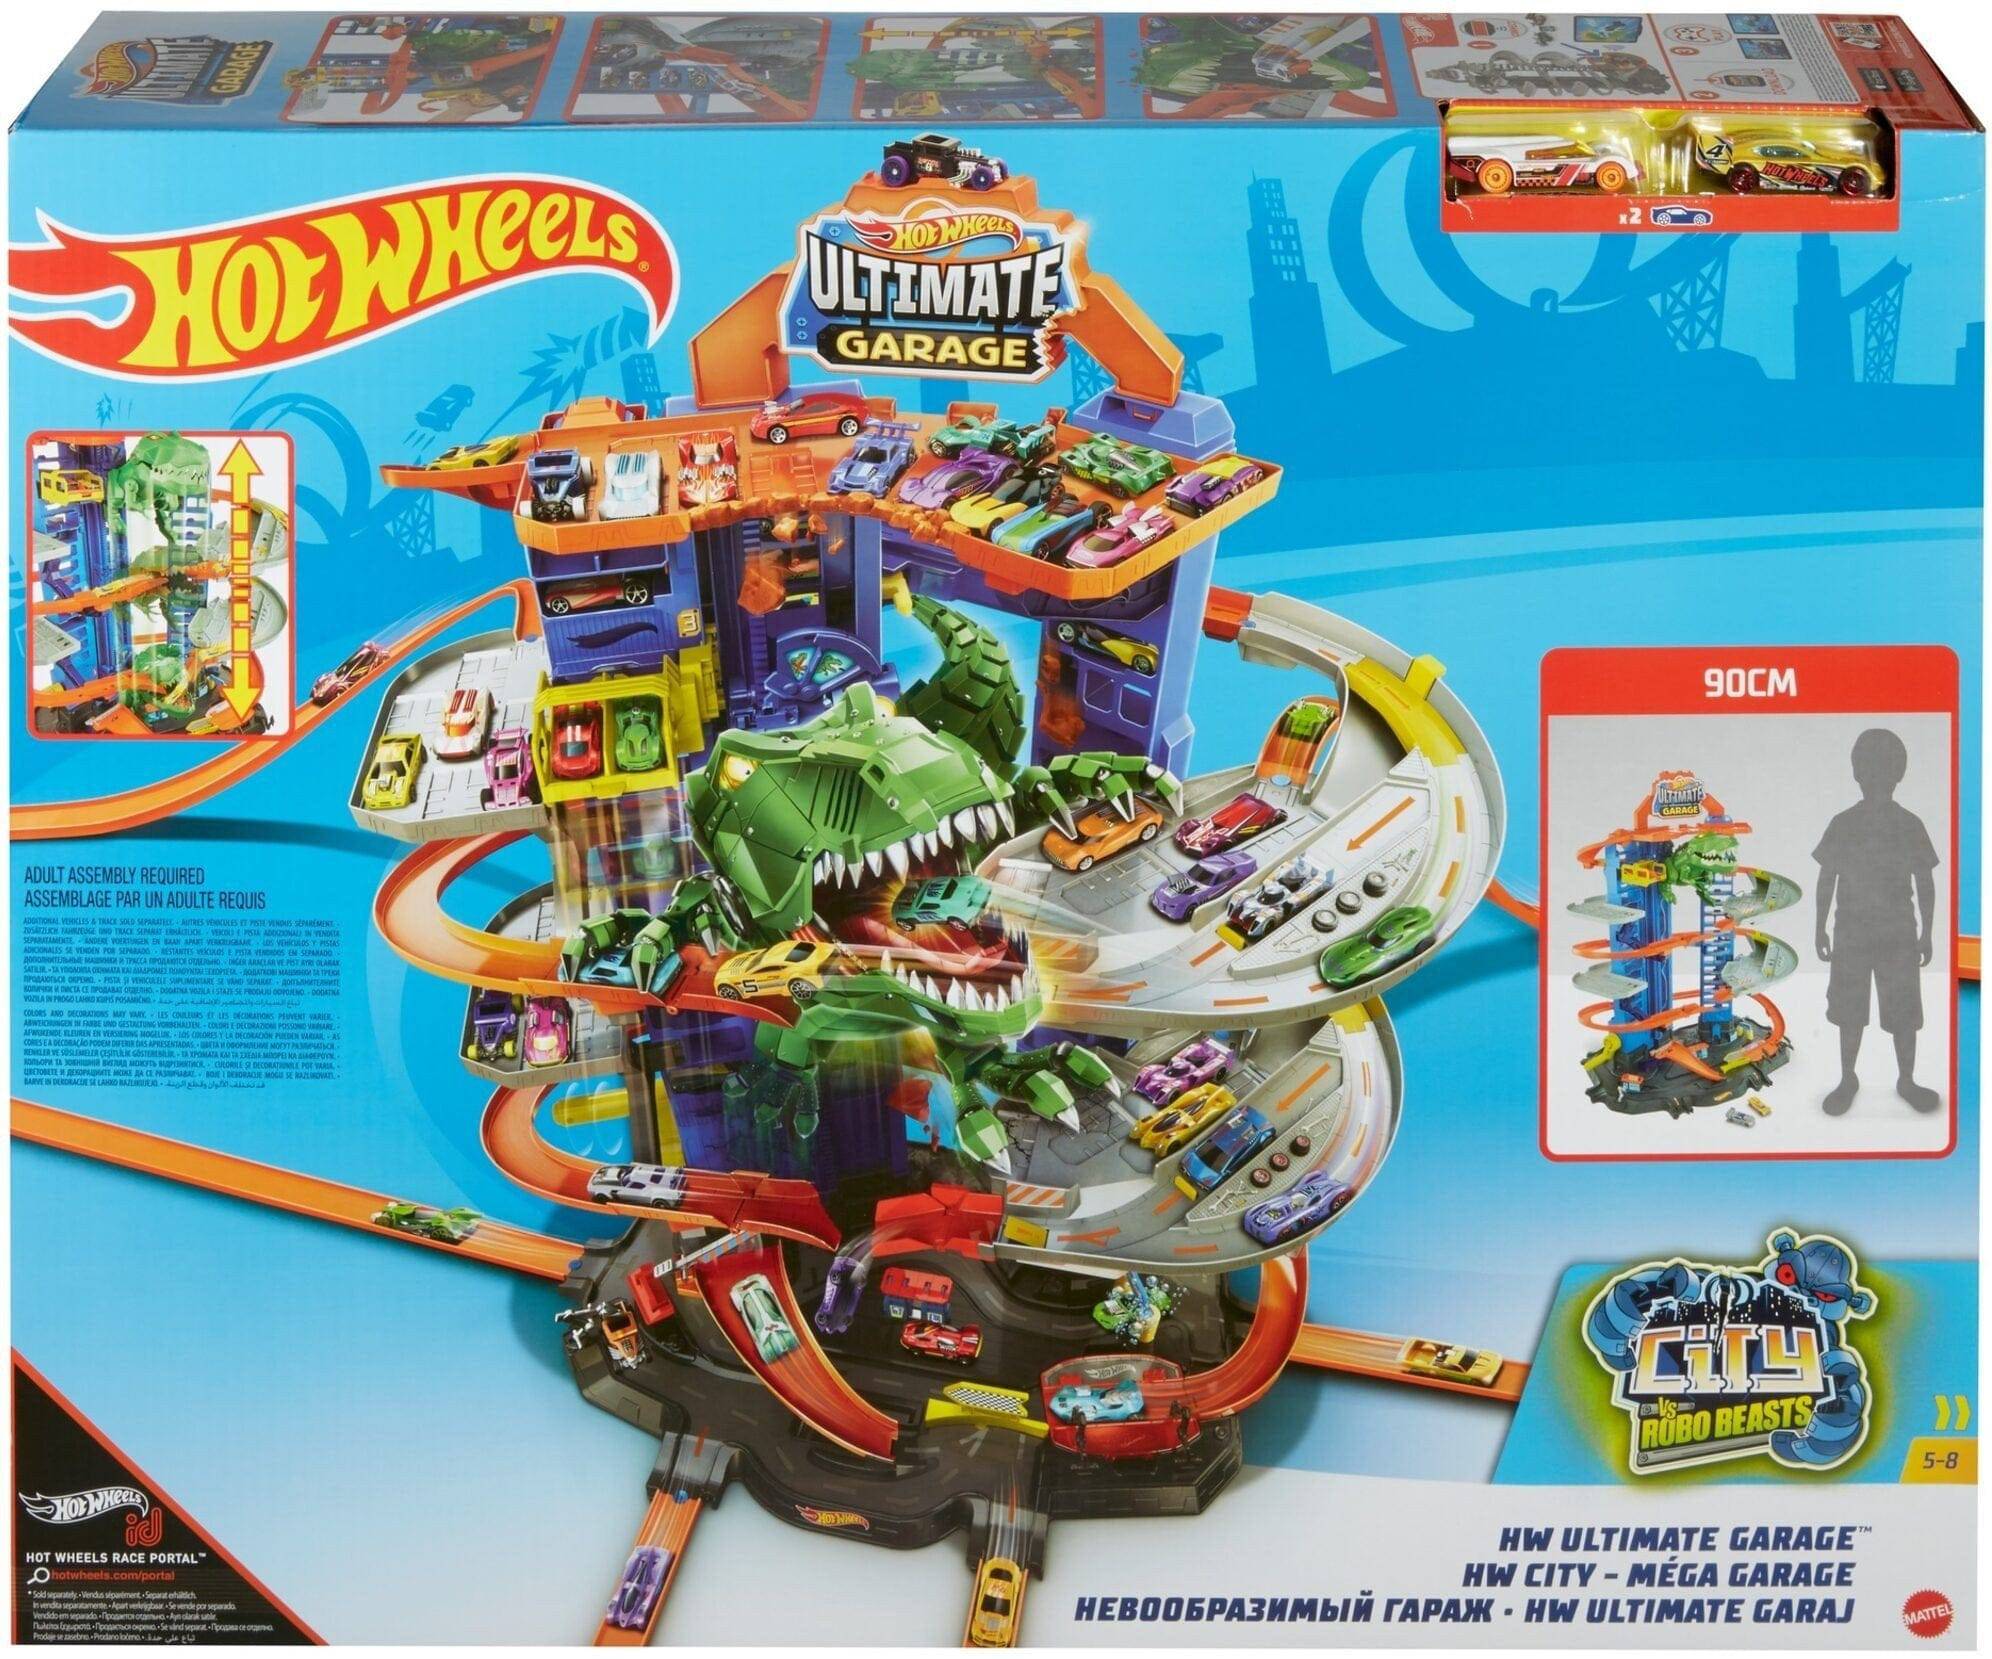 Hot Wheels City Air Attack Robo Dragon Play Set Motorized with